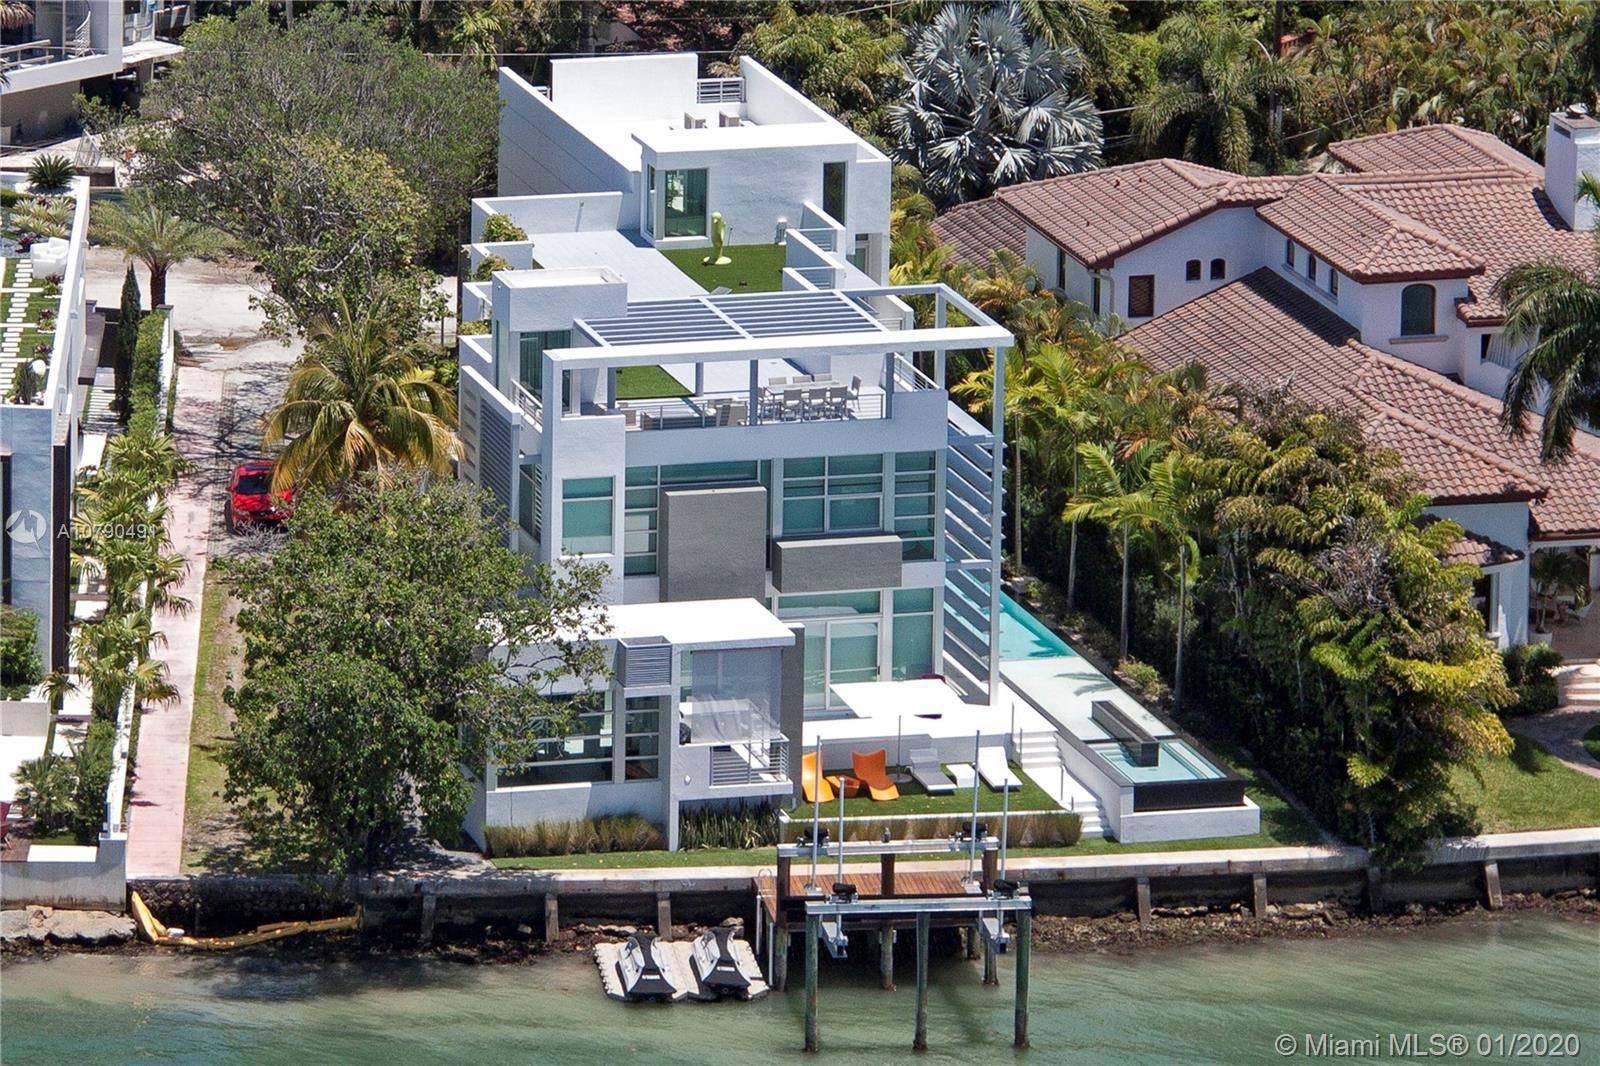 This world famous Modern Miami Beach Property designed and furnished beautifully.